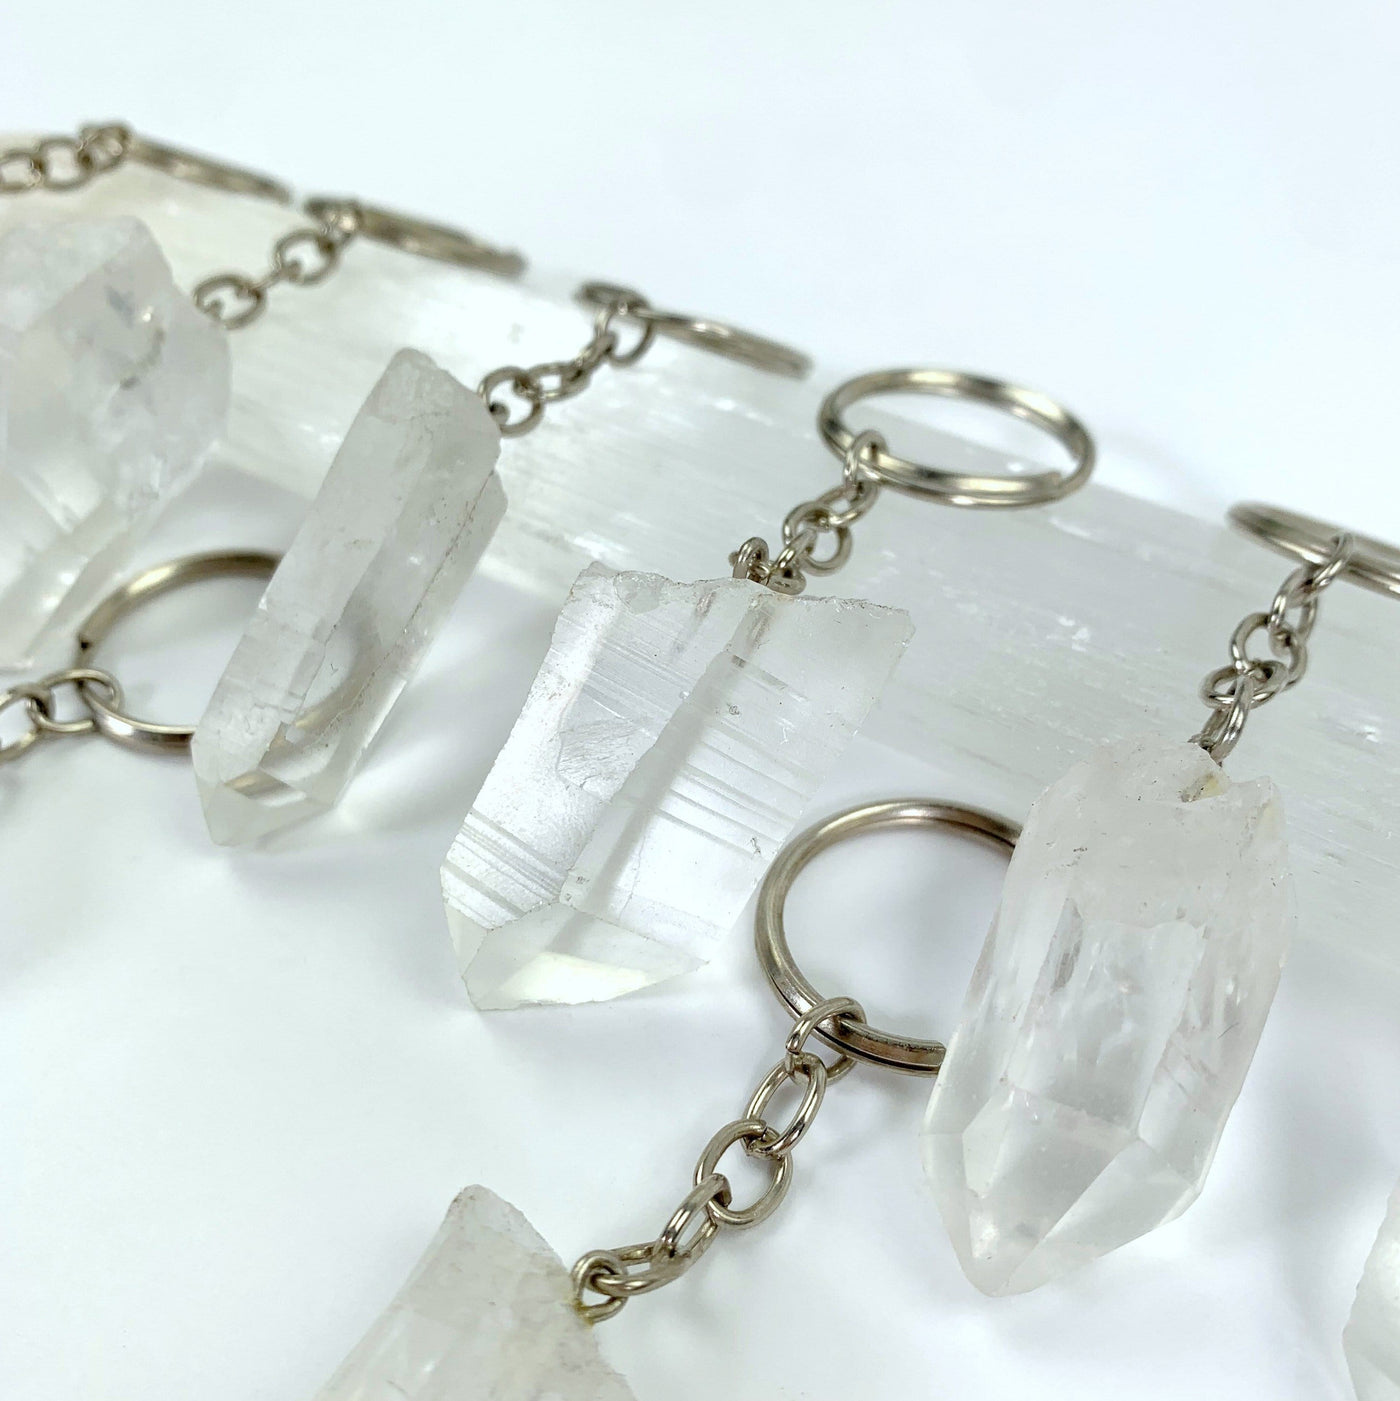 Natural Lemurian Point Keychains - close up